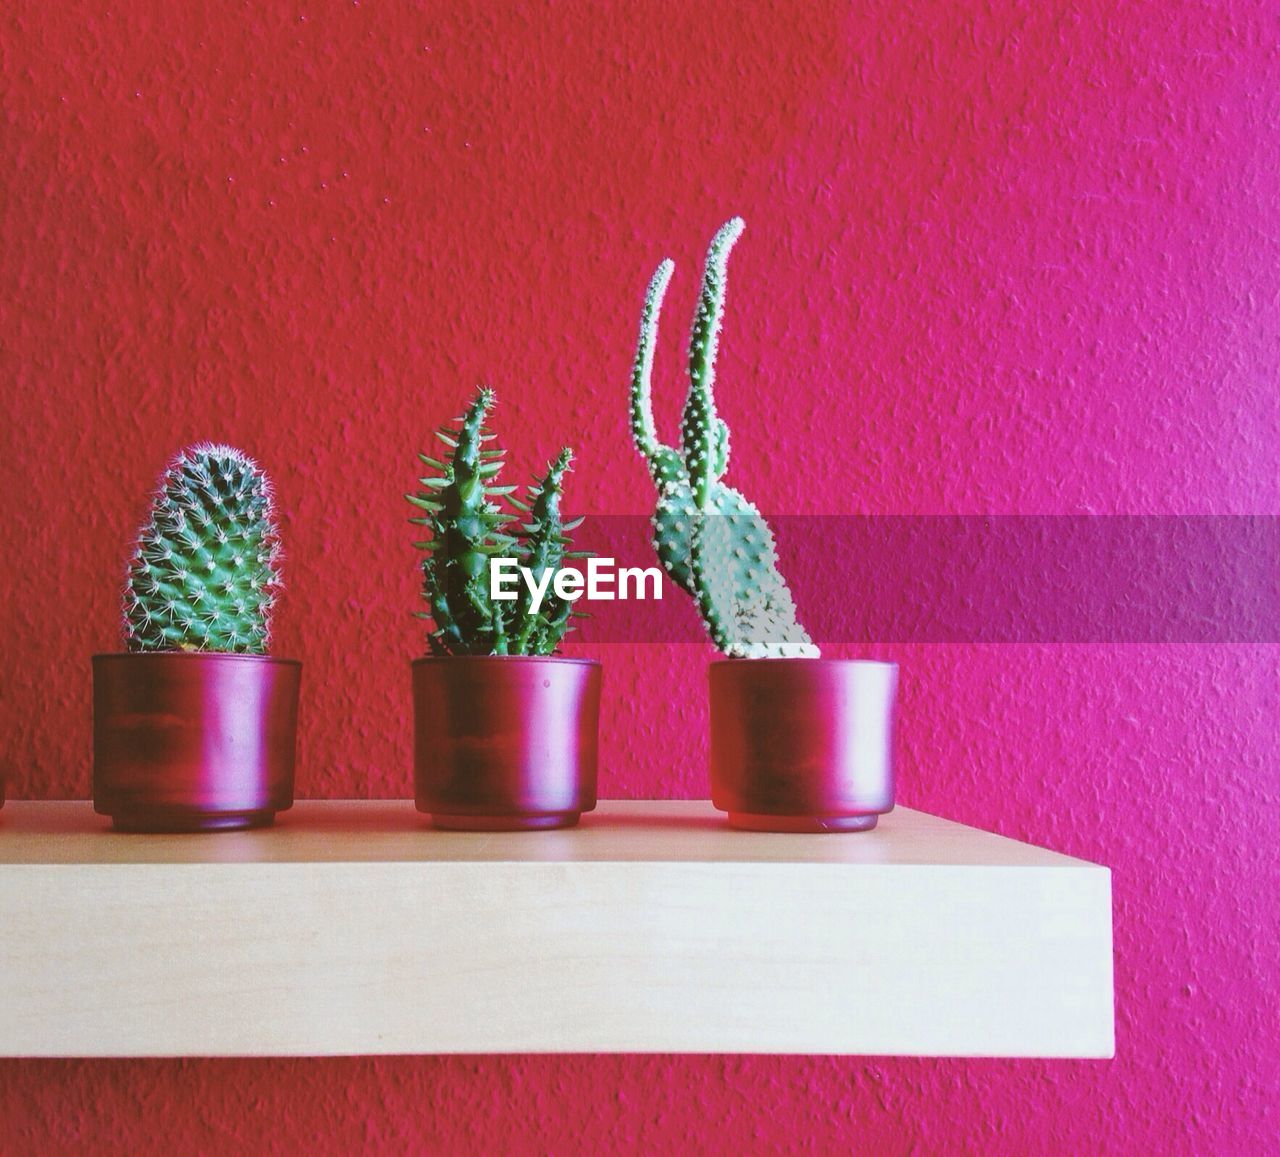 Cactus plant in pots on rack